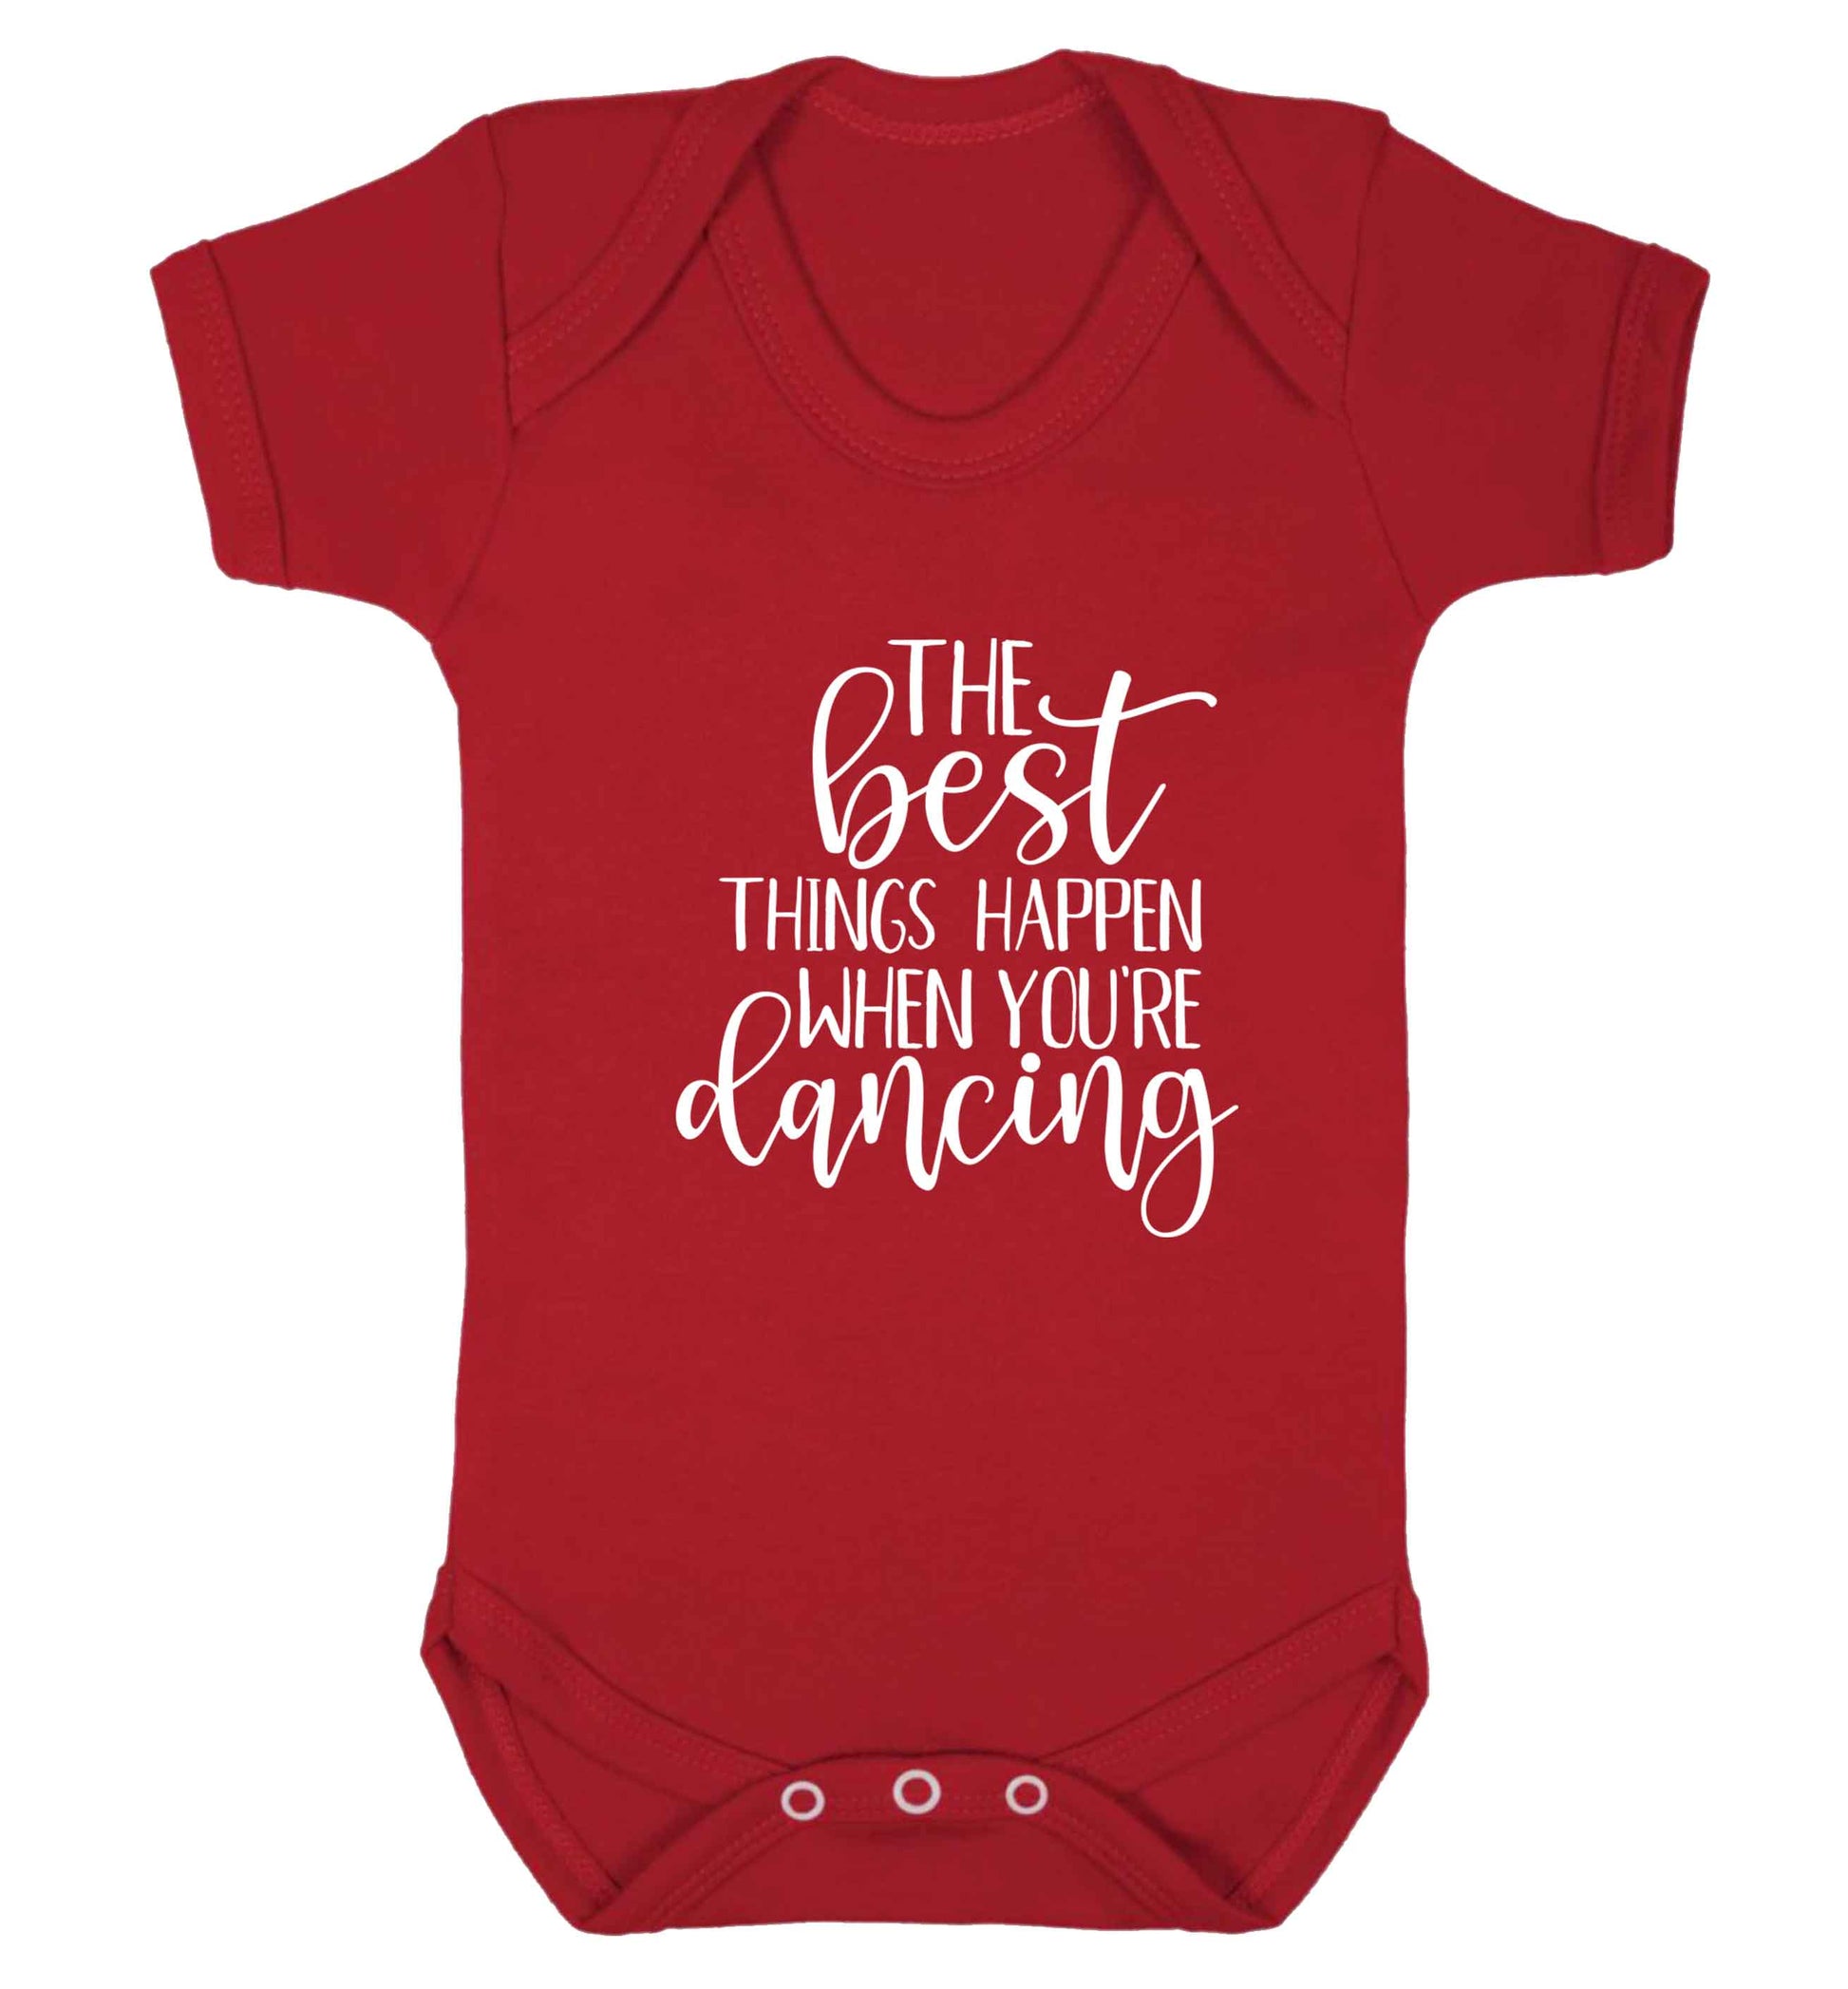 Best Things Happen Dancing baby vest red 18-24 months